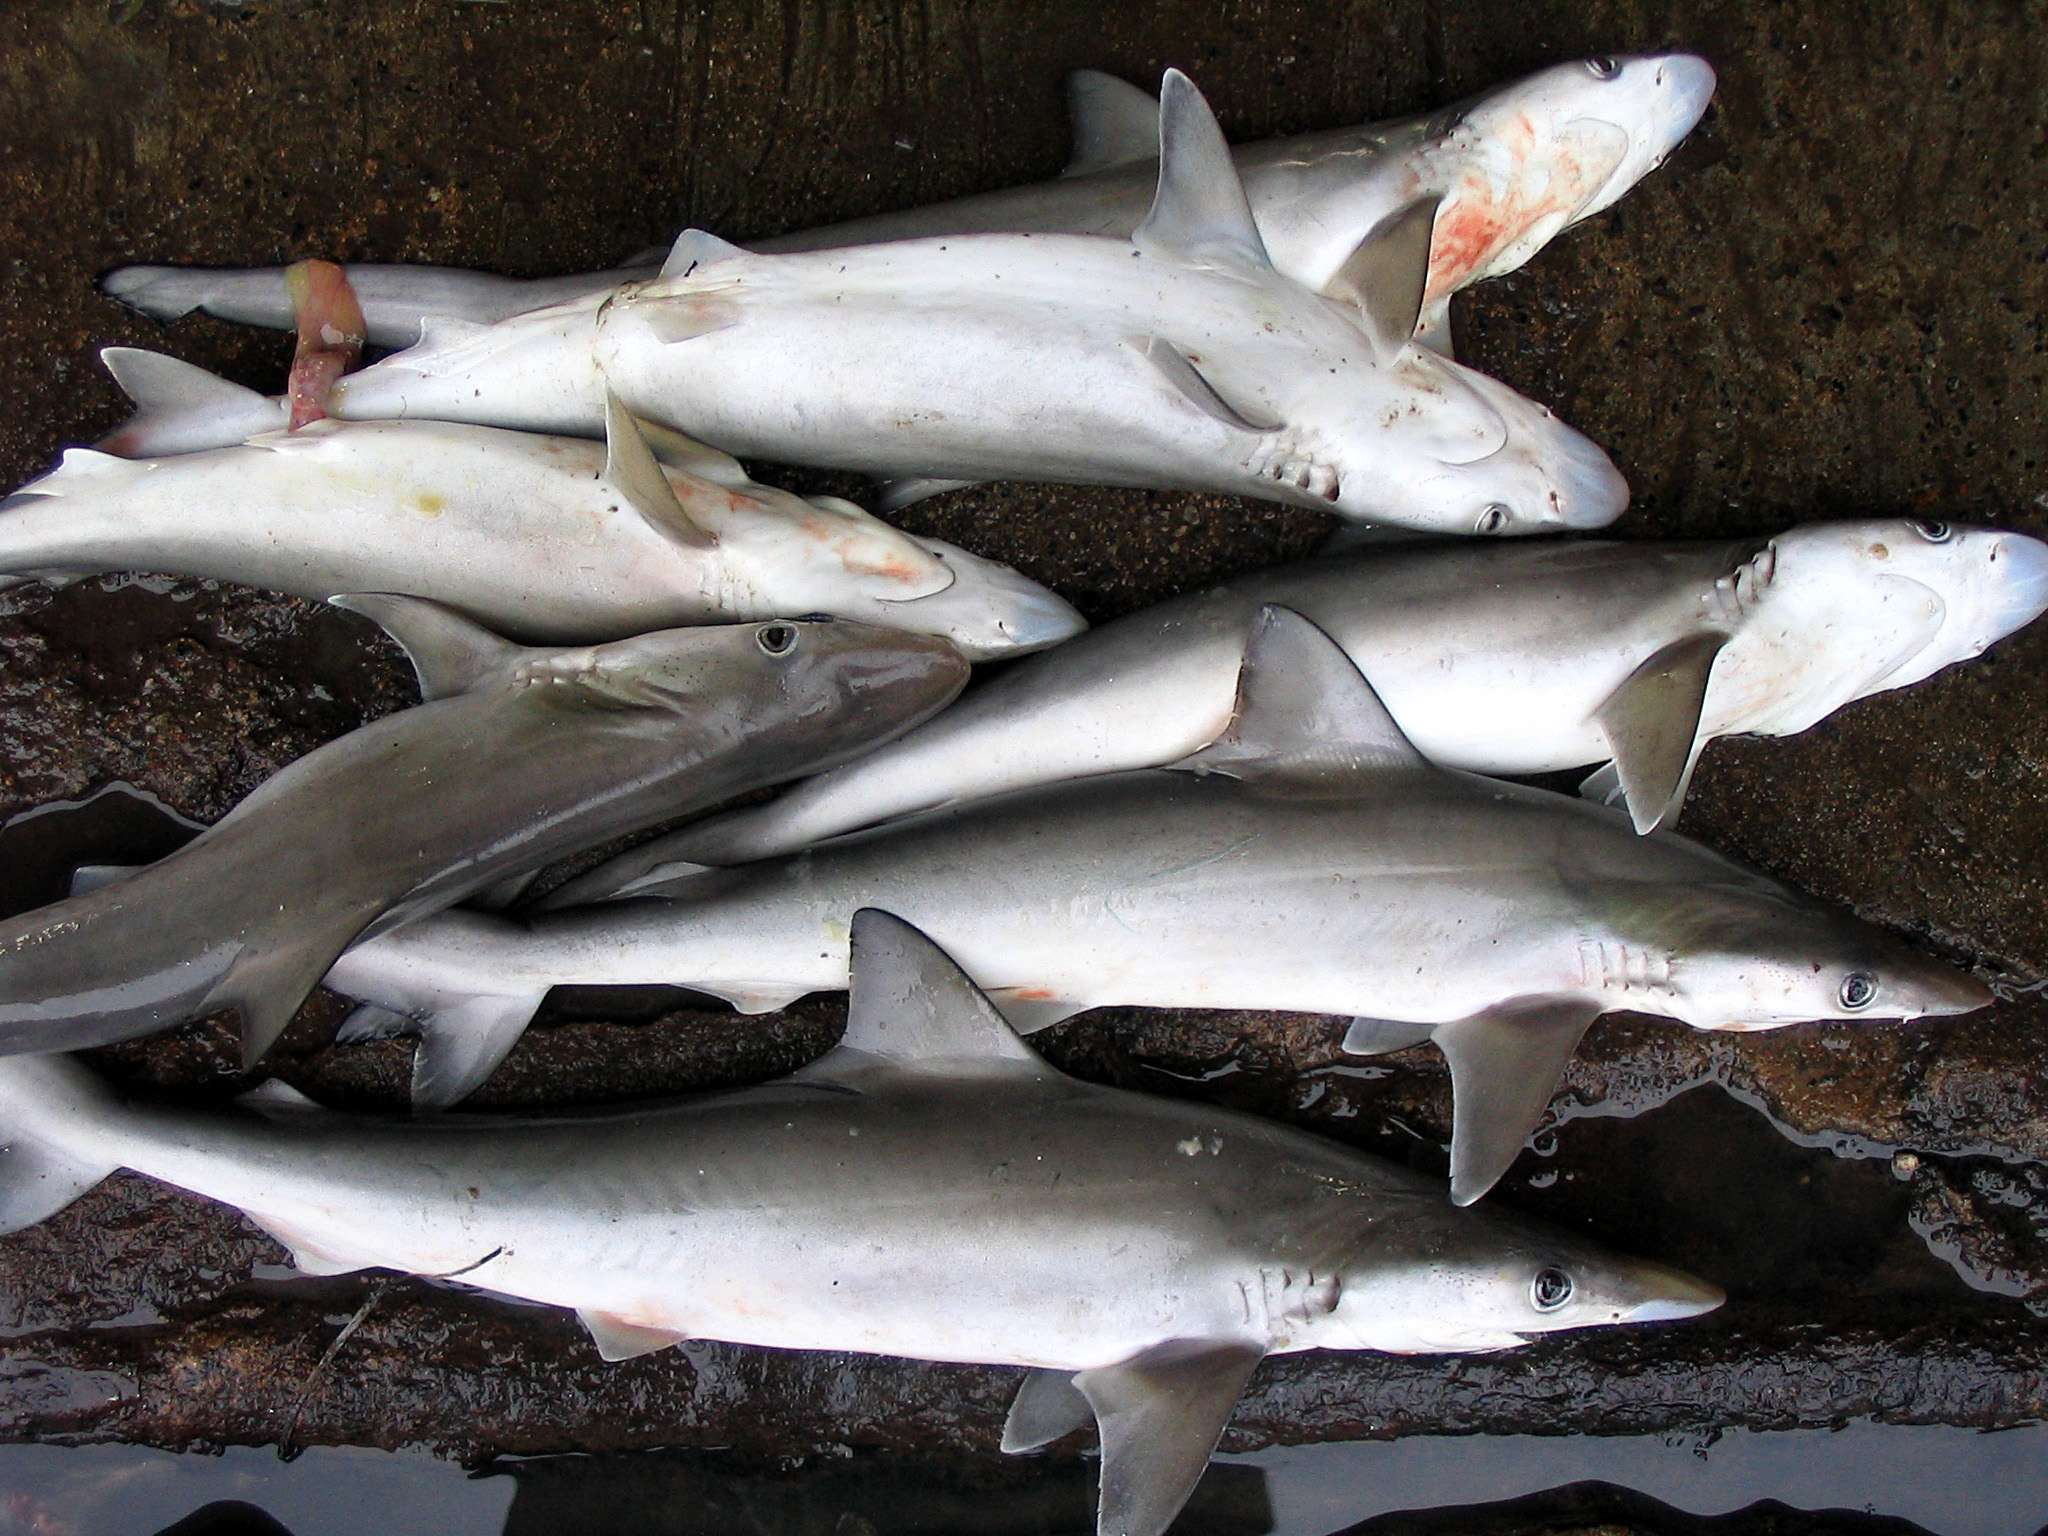 Several freshly caught, slender gray sharks with long snouts and large eyes, lying on a pier